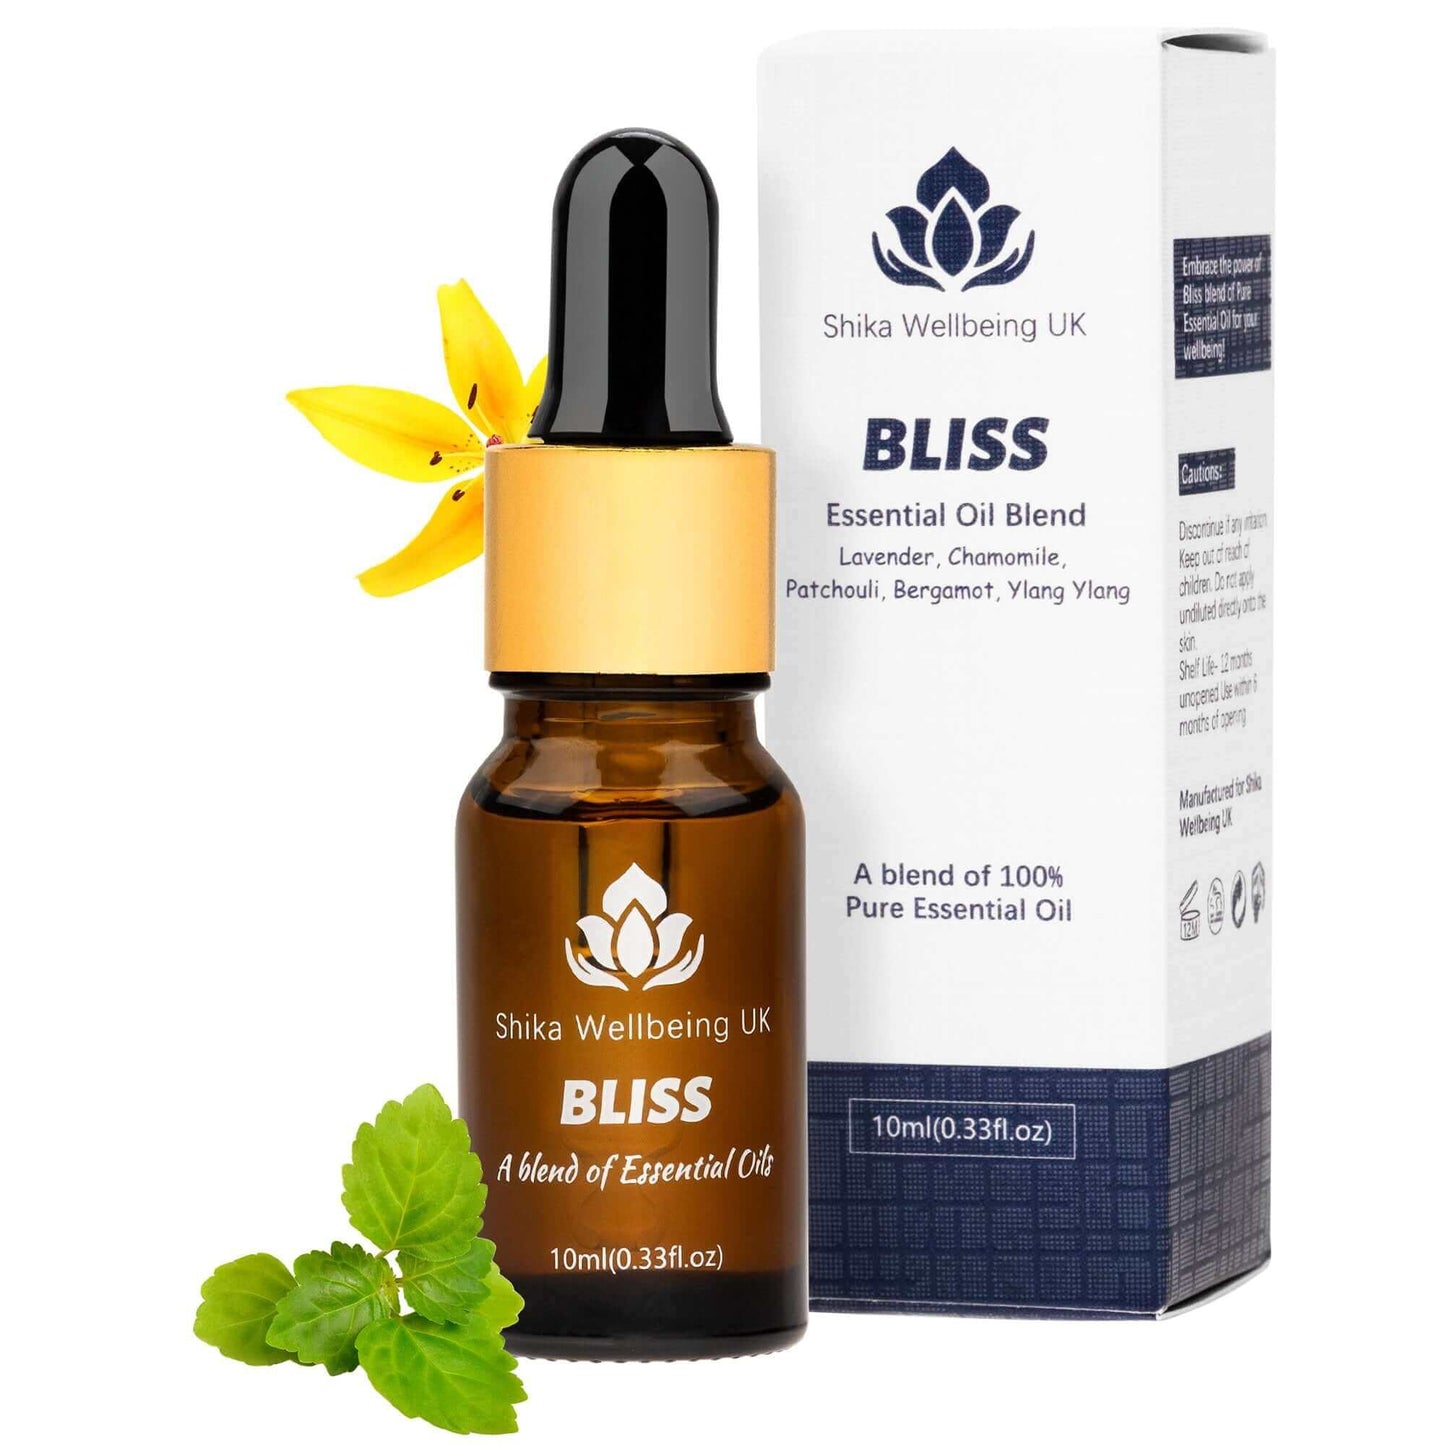 Bliss Essential Oil 10ml size, 100% Pure Essential Oil Blend for your wellbeing, ideal for lava bracelet & diffusers oil essential oils diffuser fragrance set lavender candle nikura sleep aromatherapy home diffusers